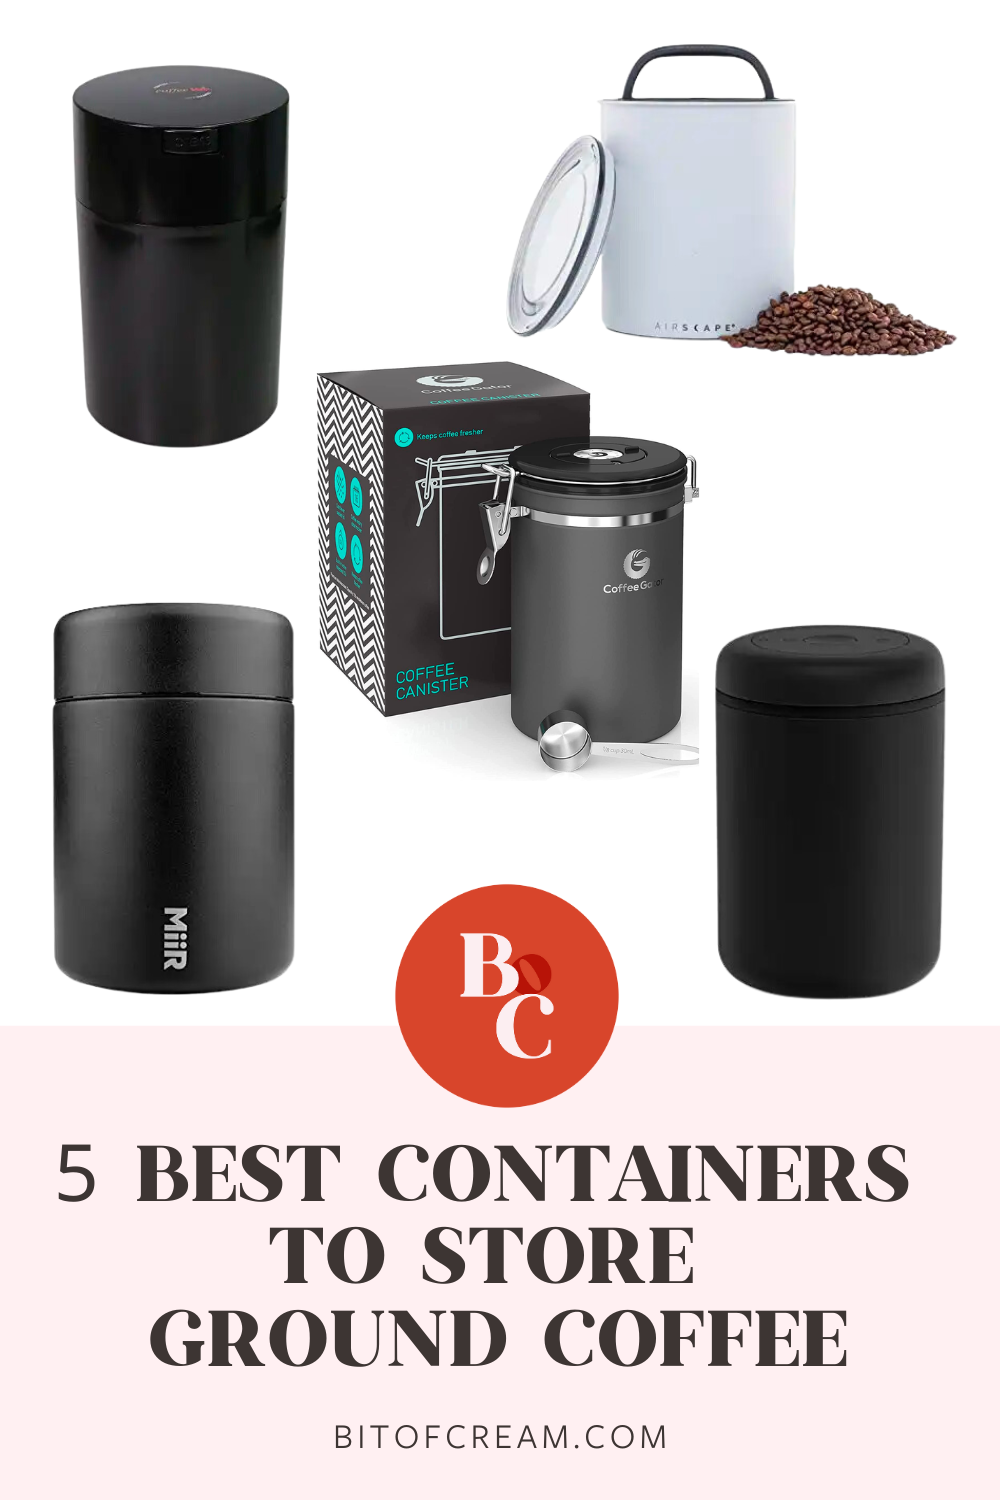 5 Best Containers to Store Ground Coffee